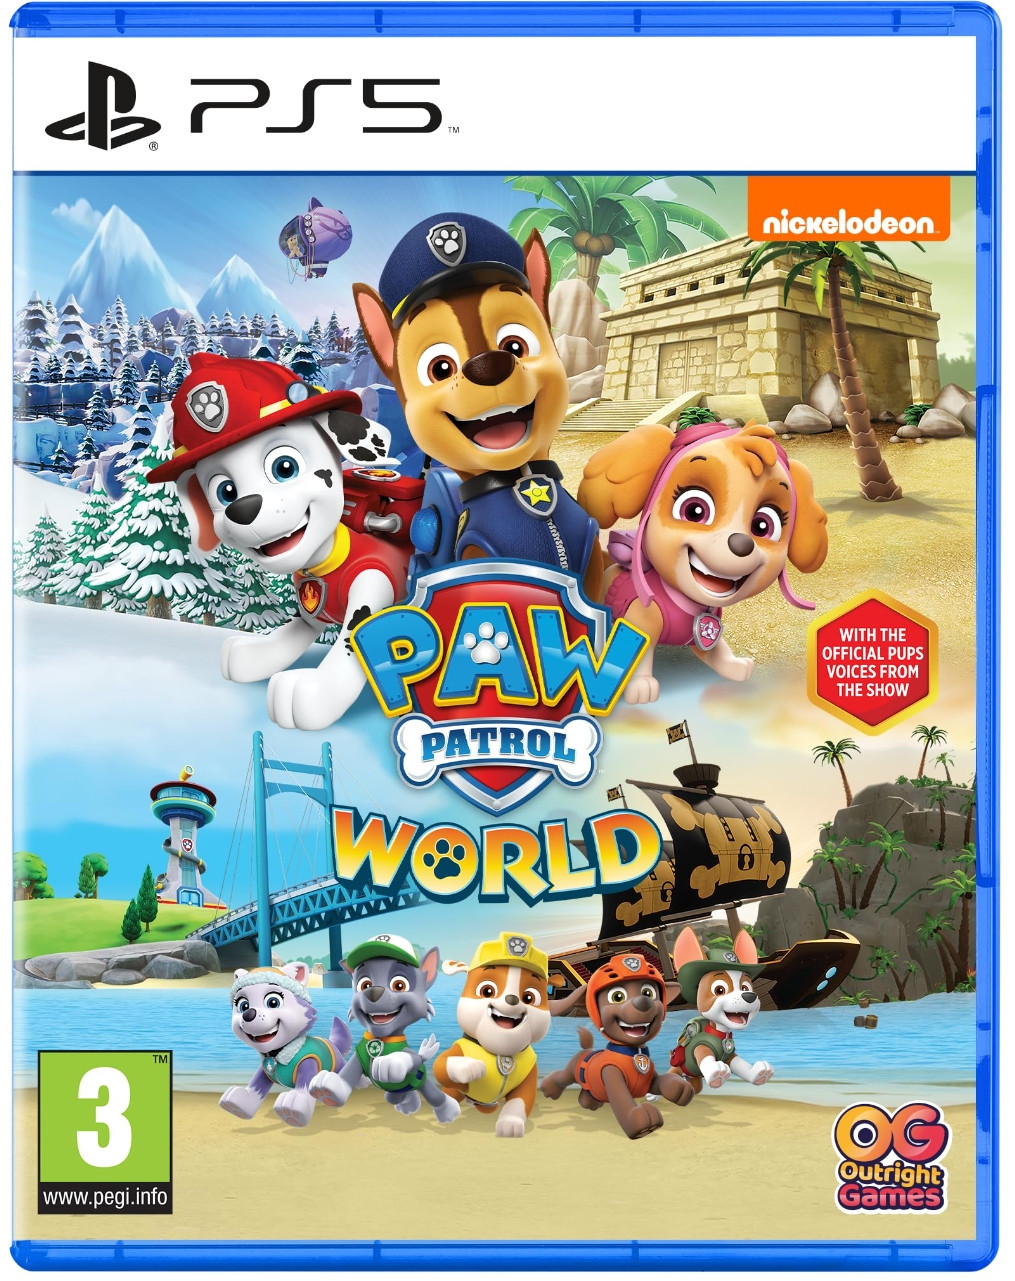 Paw Patrol: World (PS5), Outright Games